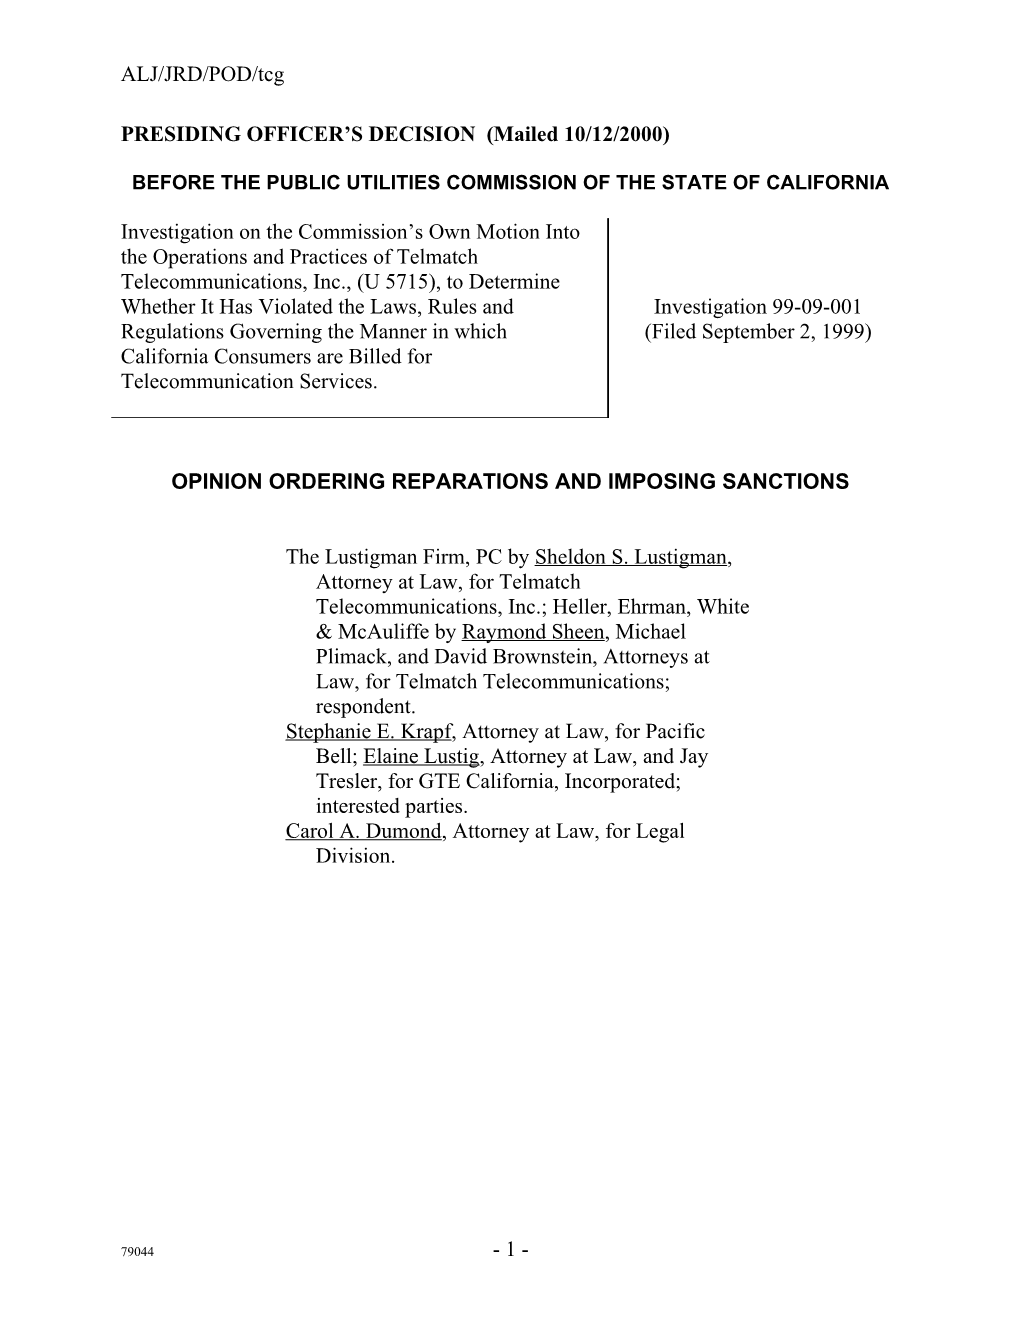 Before the Public Utilities Commission of the State of California s119